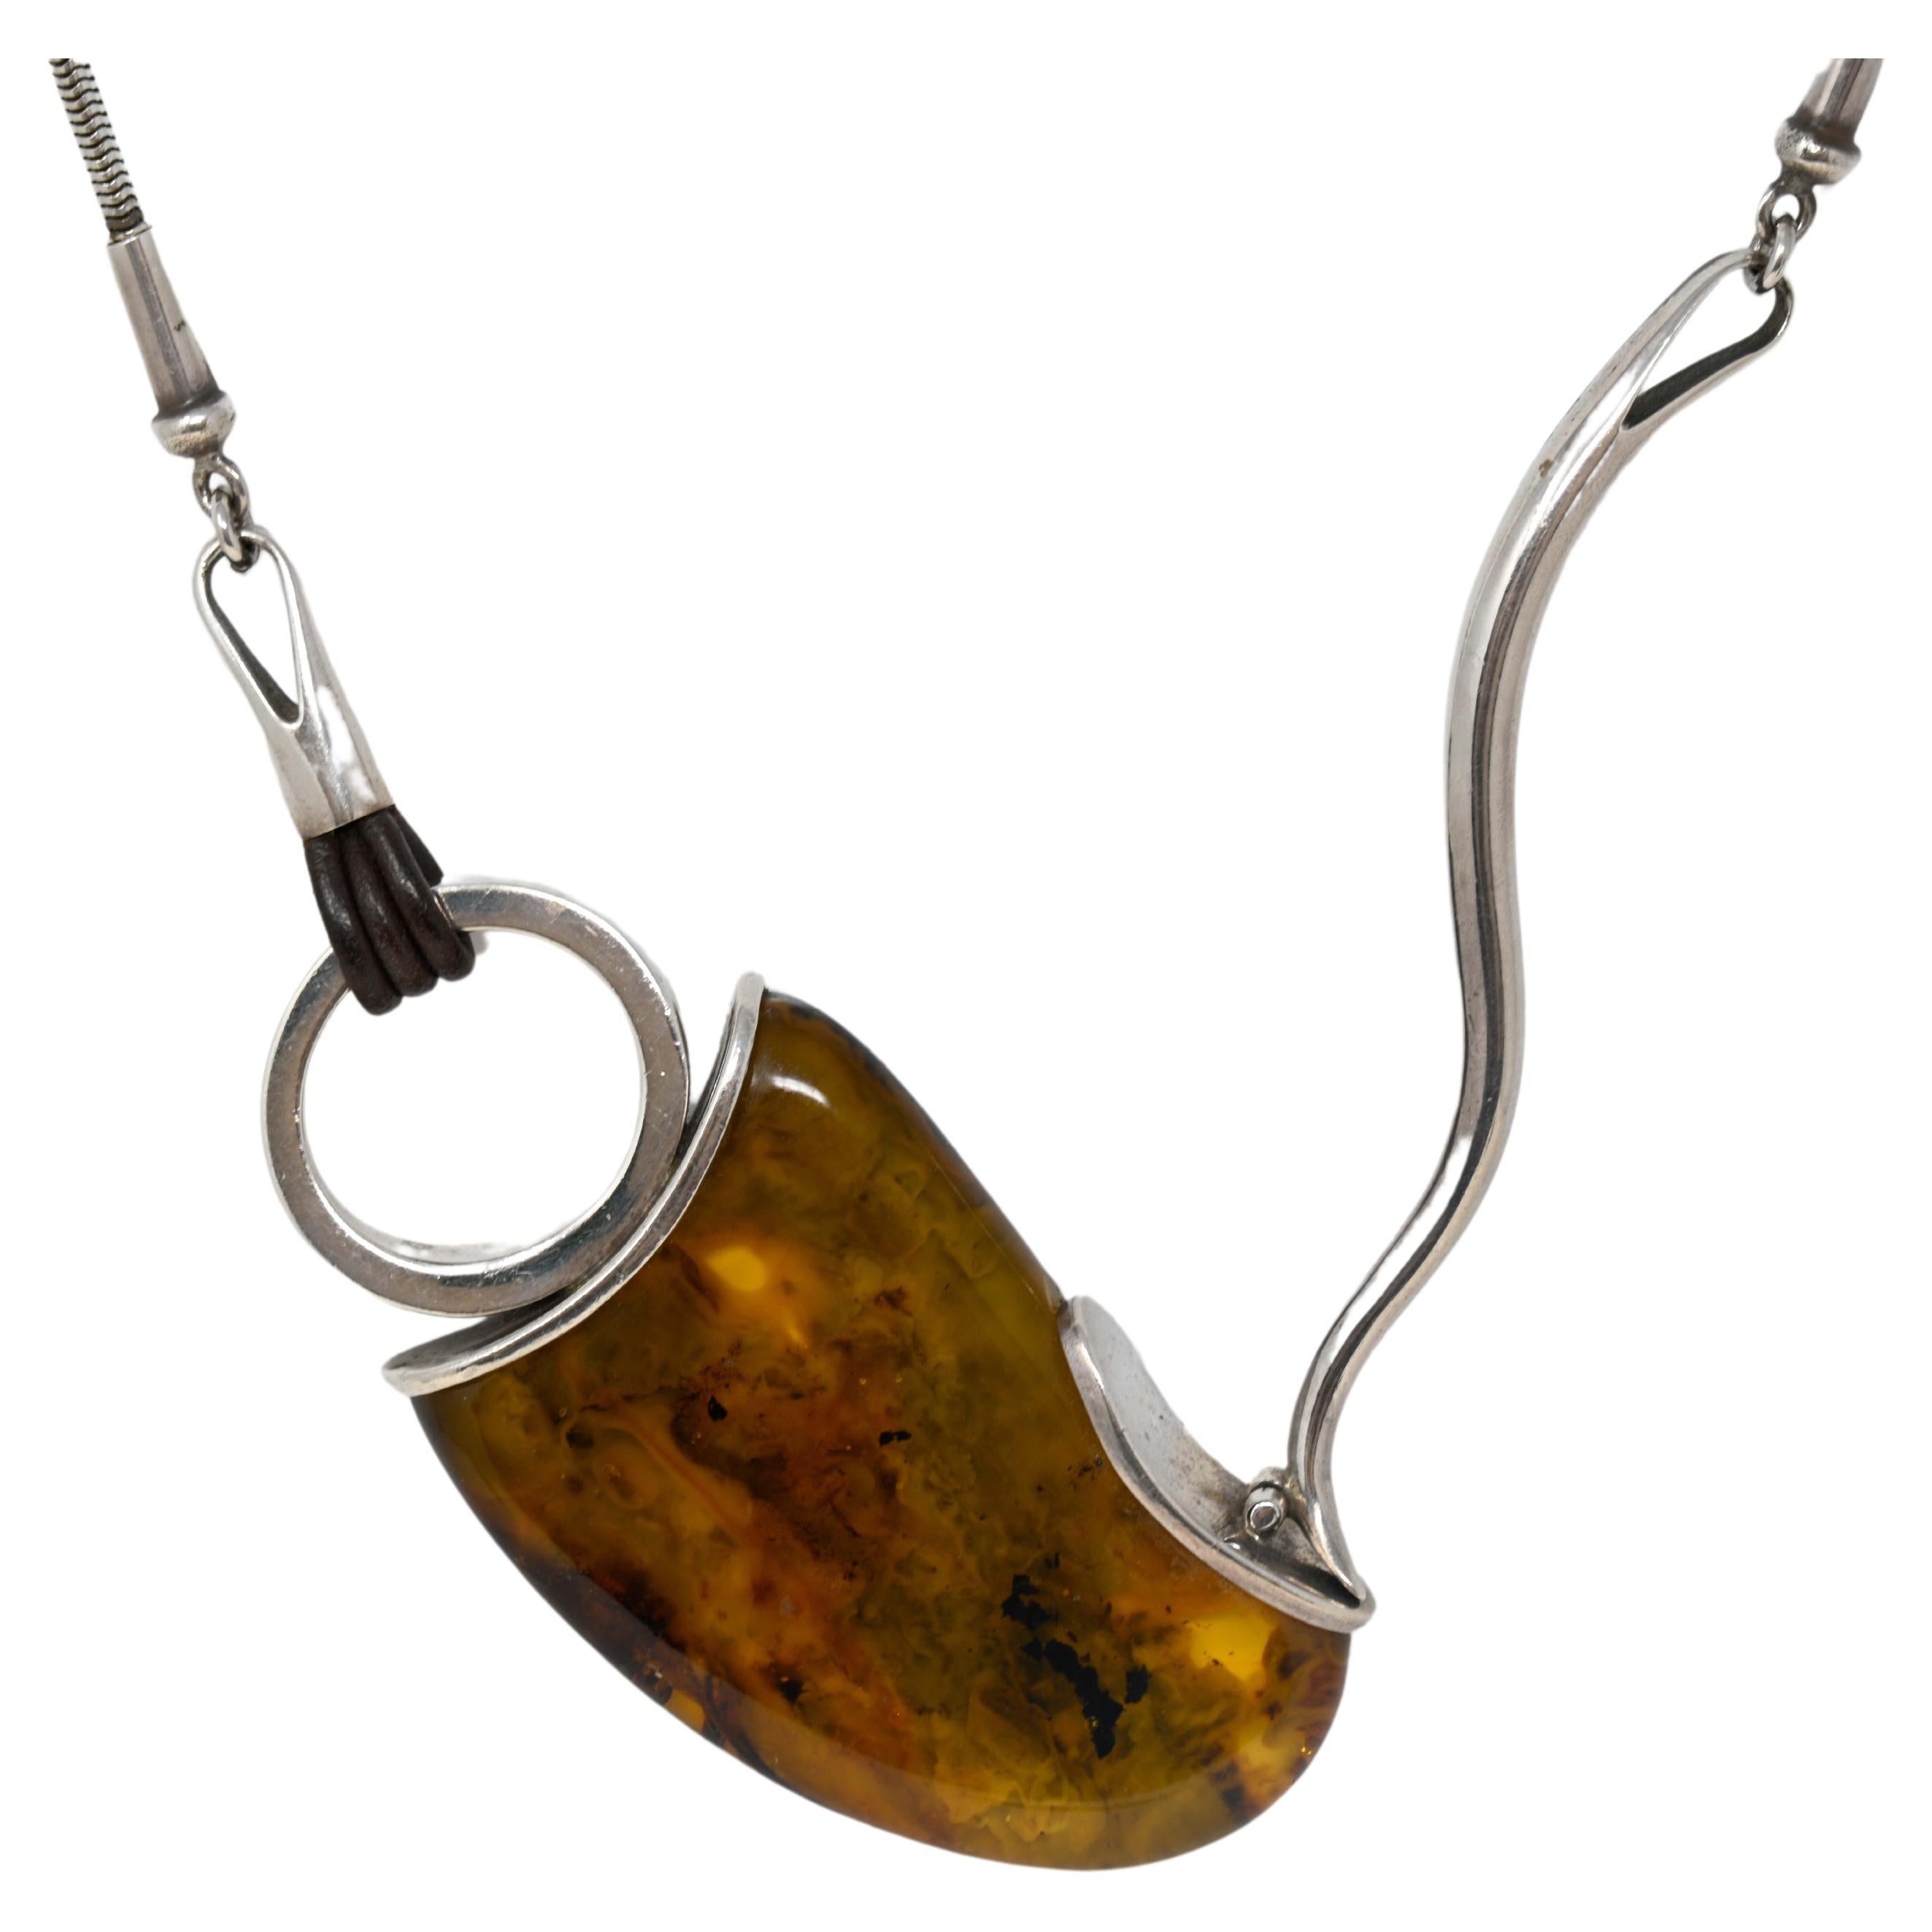 Modernist Silver Necklace with Baltic Amber